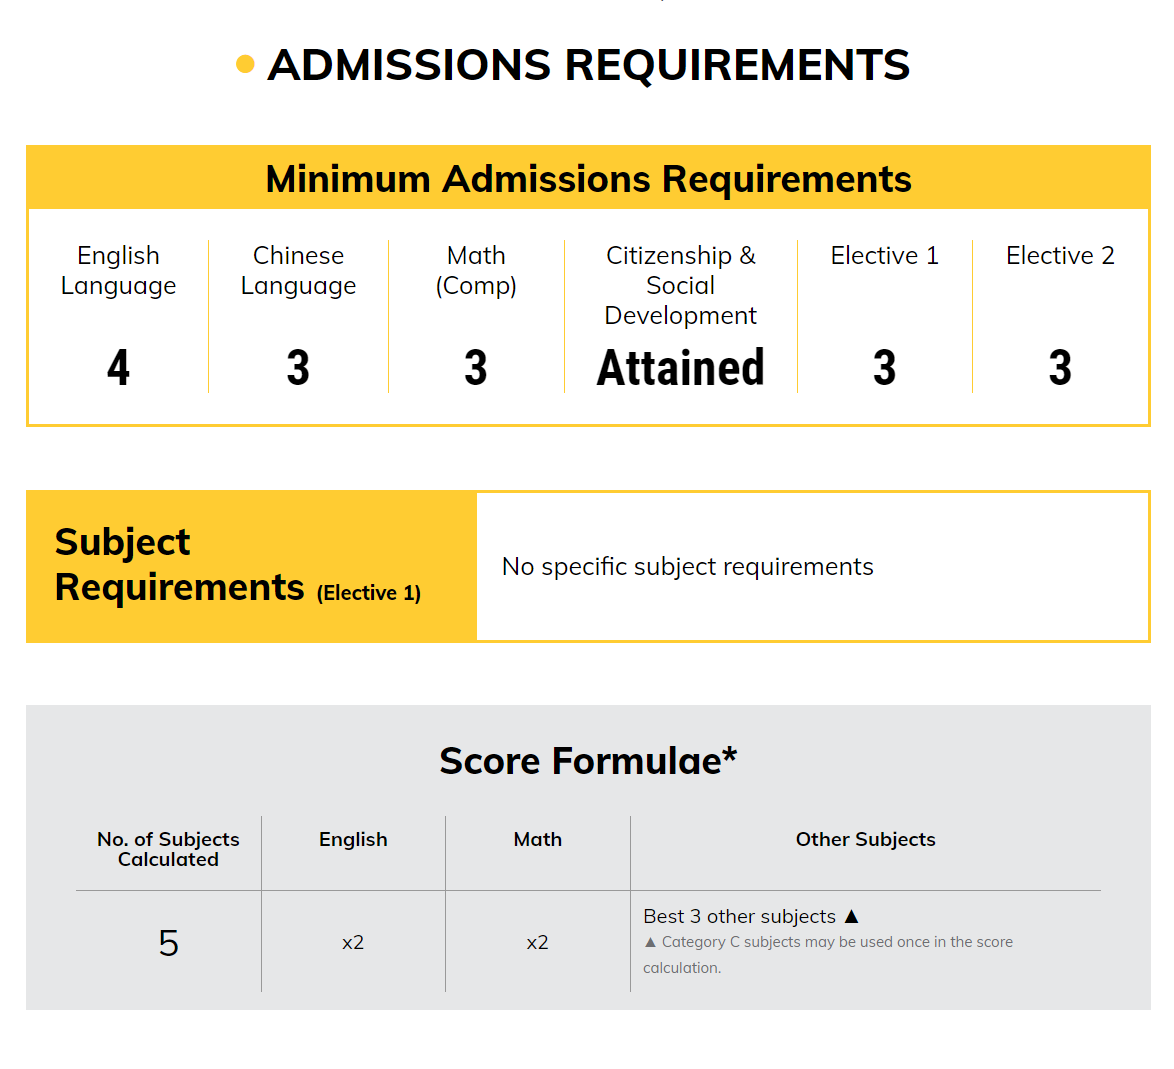 ADMISSIONS REQUIREMENTS